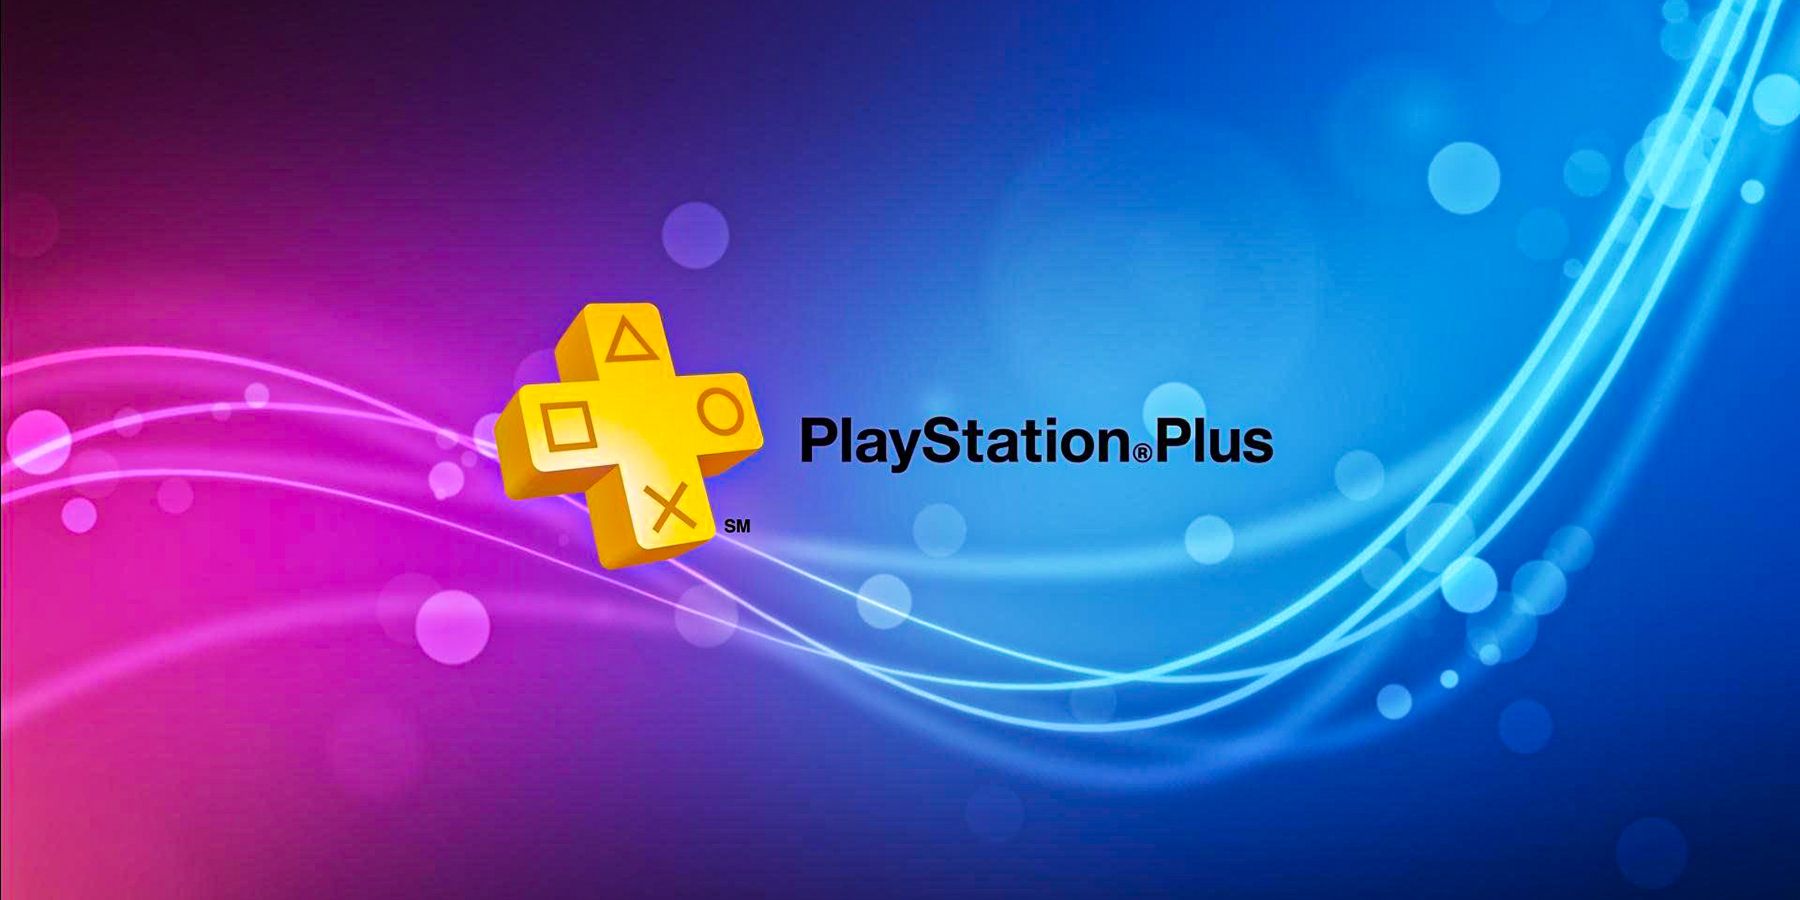 PS Plus Free Games For February Are Available Now - GameSpot